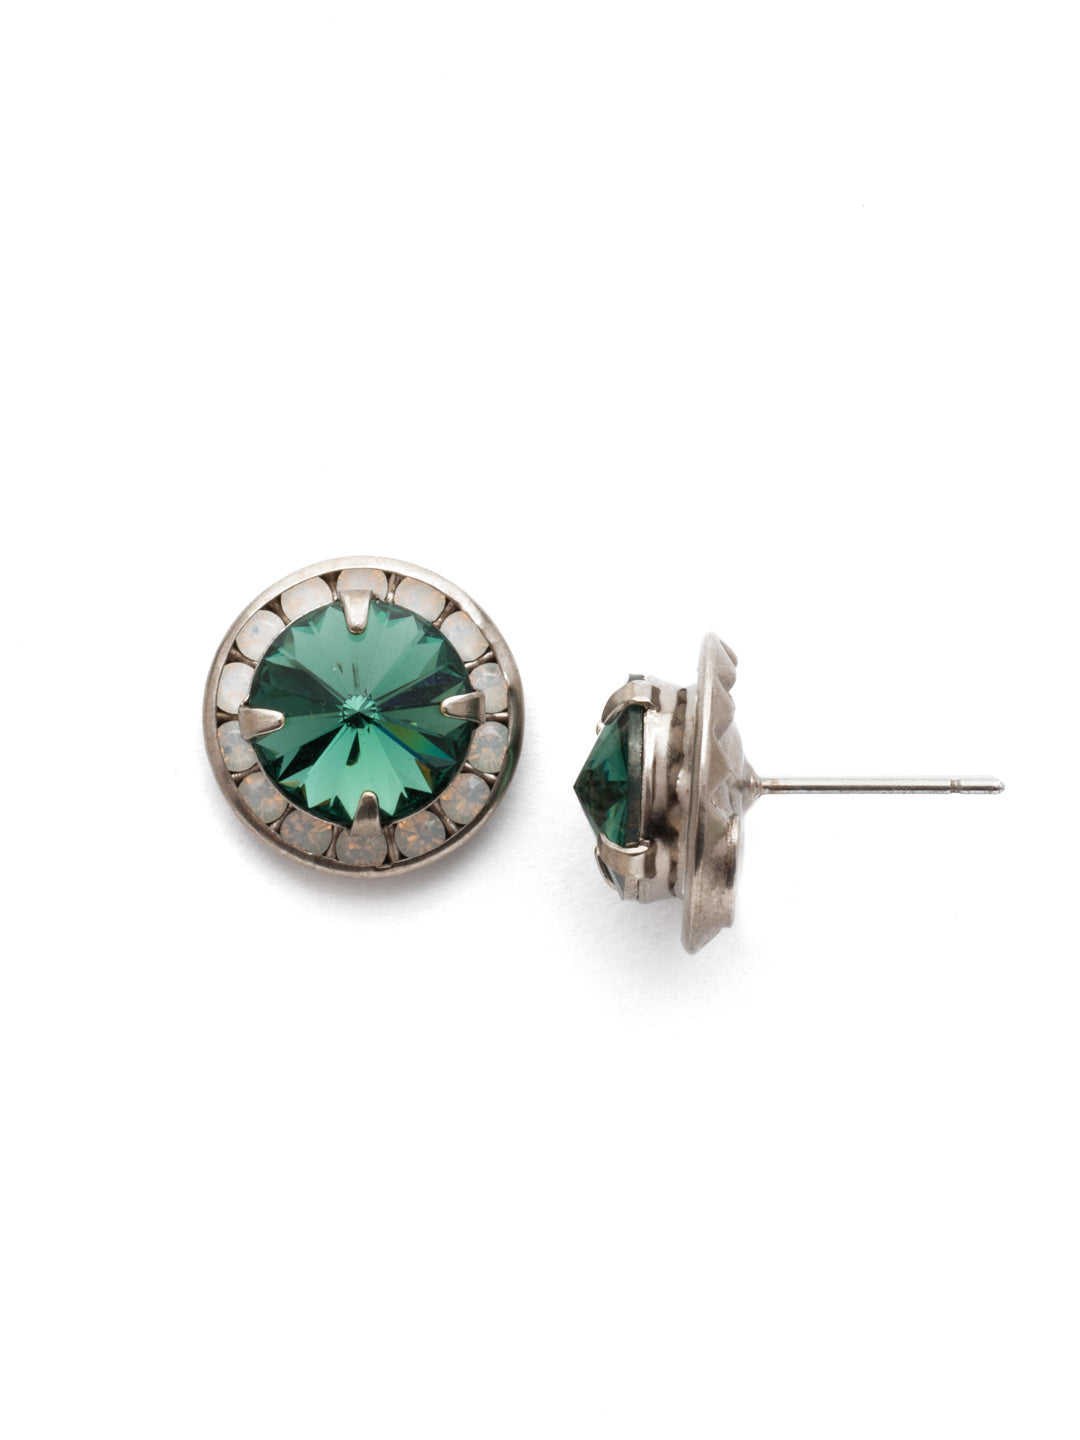 Dua Stud Earring - EEB33ASGDG - The Dua is a glamorous take on a simple stud. A sparkling round crystal, bordered by smaller crystals, will take your look from day to night effortlessly. From Sorrelli's Game Day Green collection in our Antique Silver-tone finish.